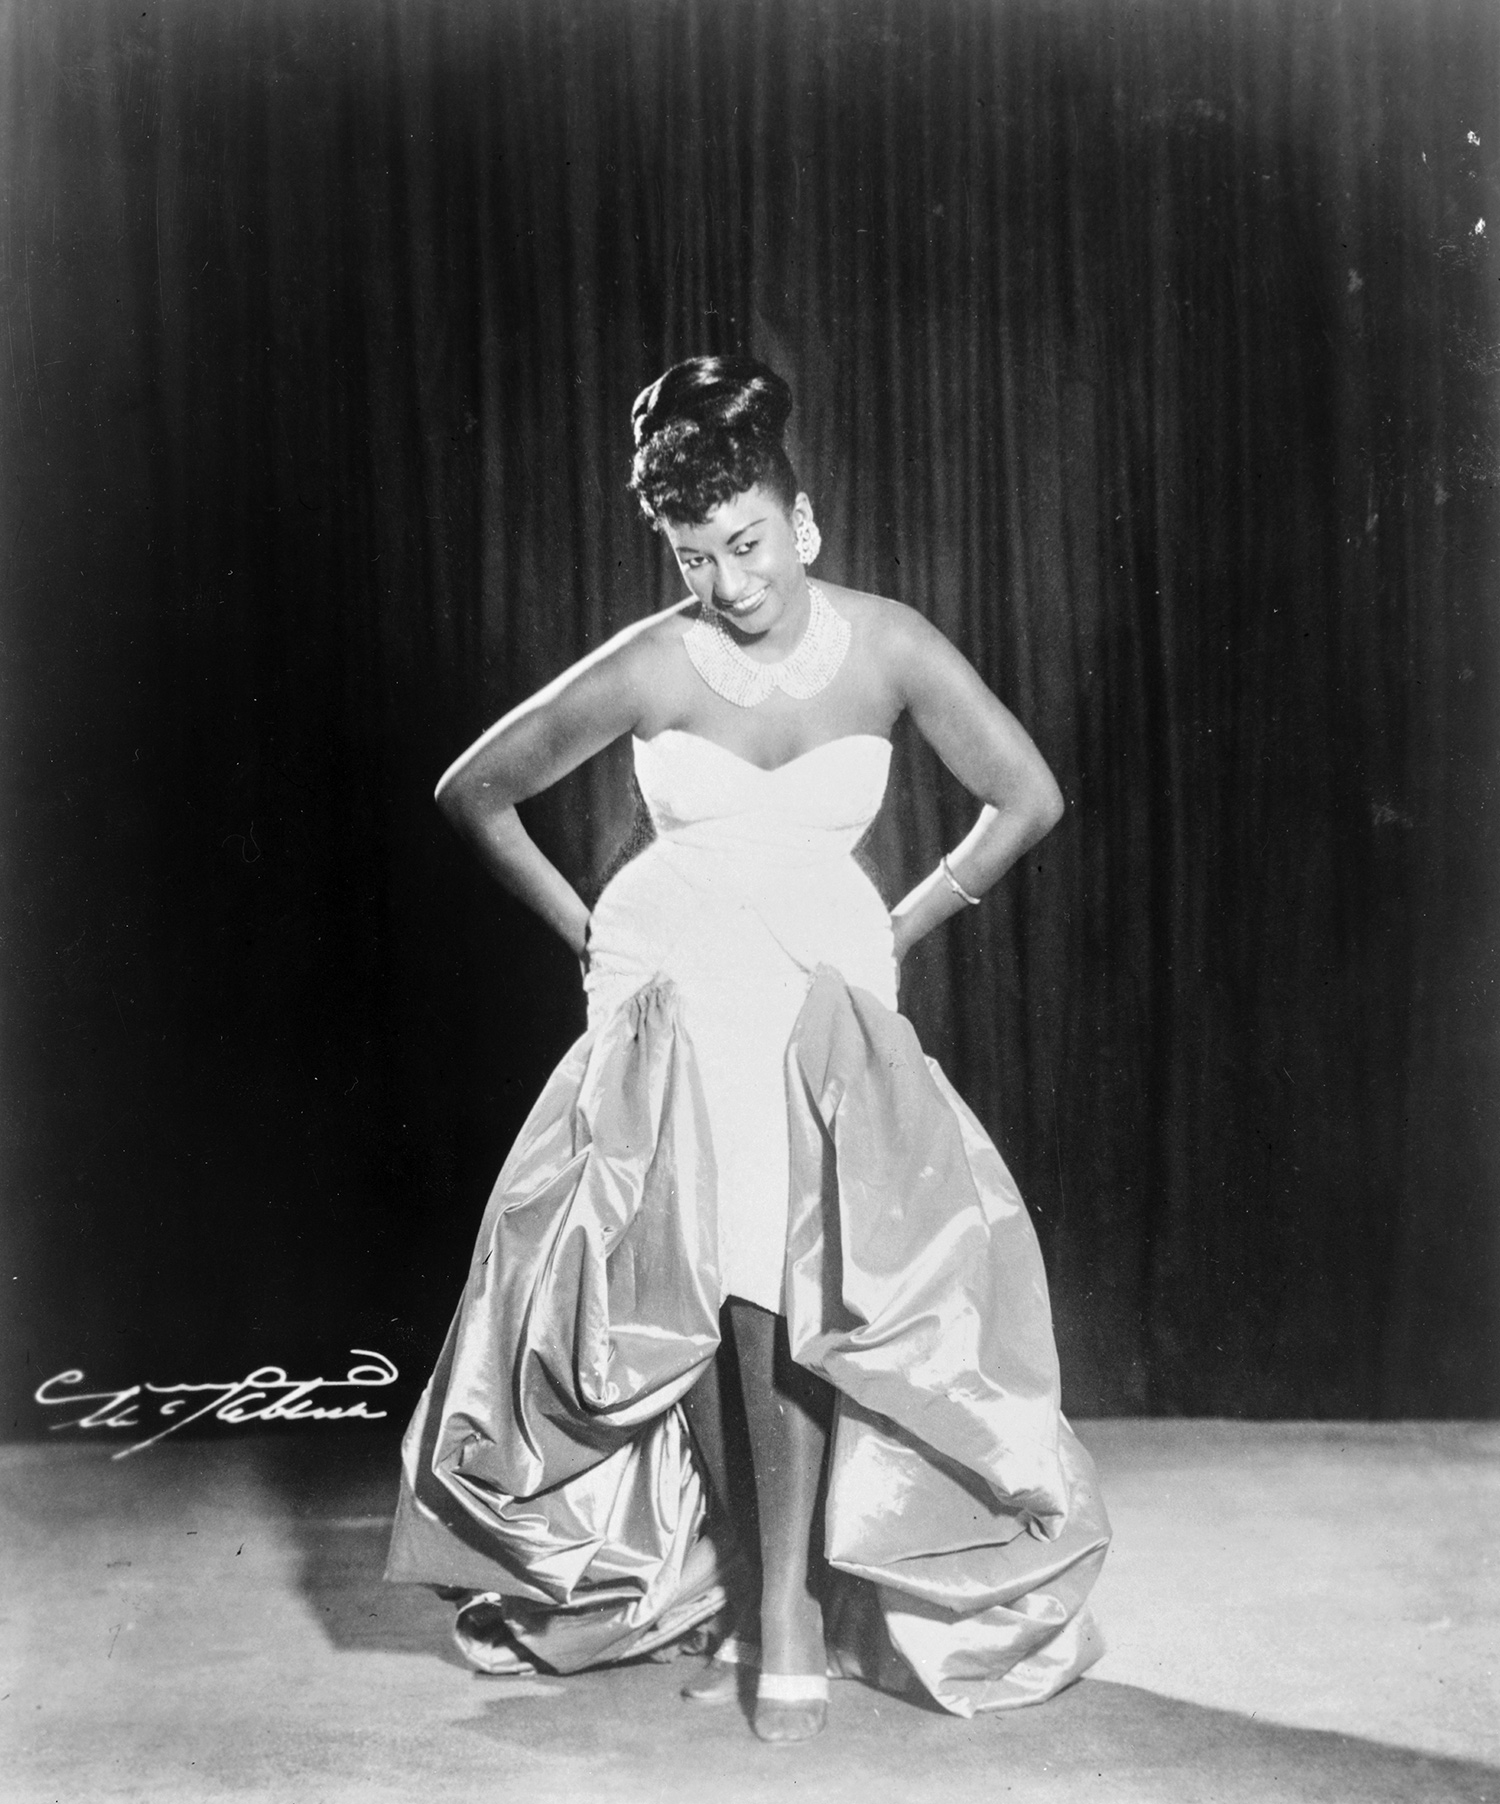 A full-length photographic portrait of a woman in a glamorous evening dress and smiling, her gaze cast downward. 